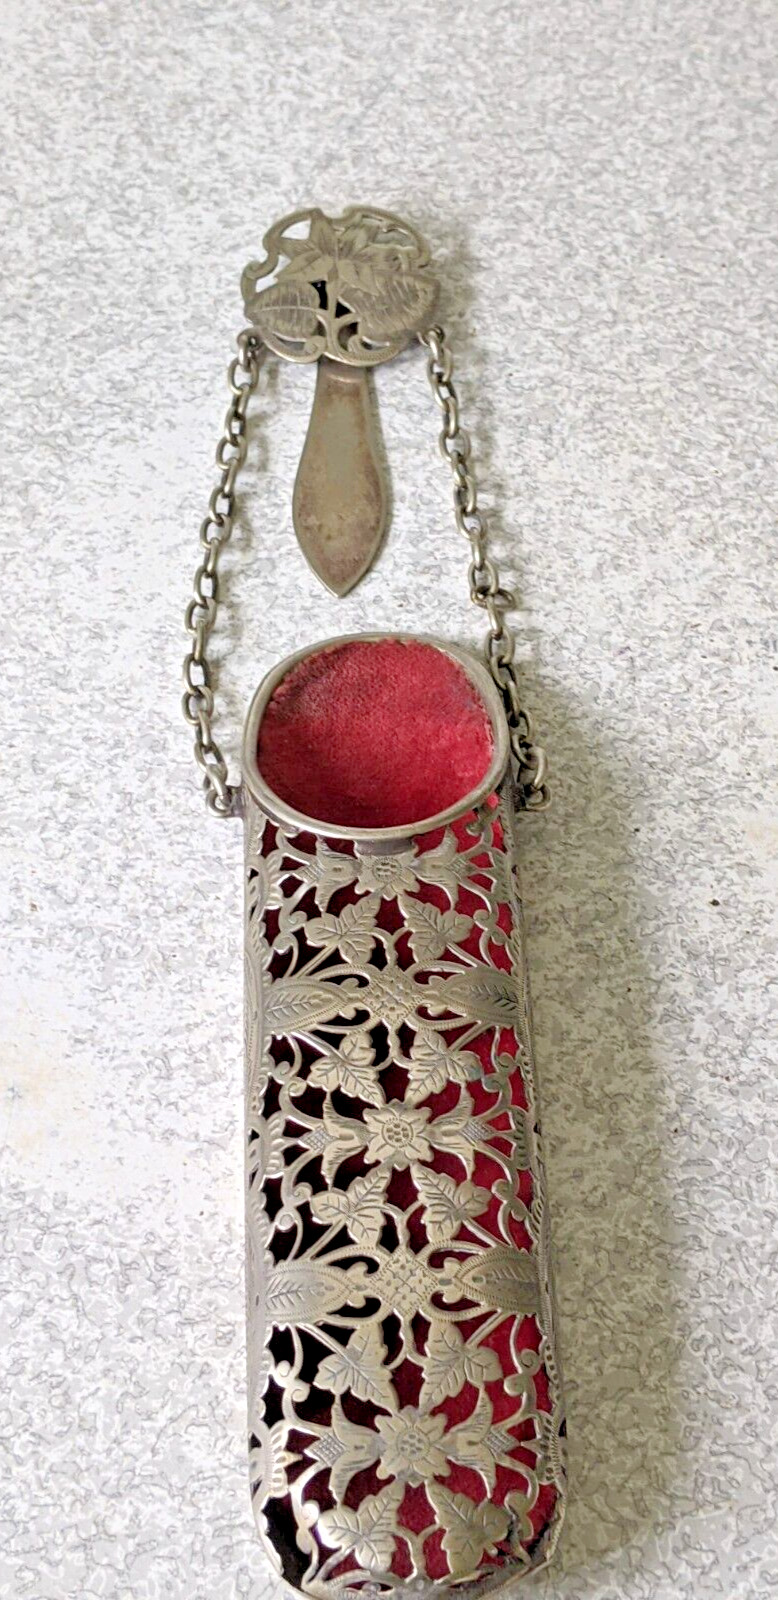 ANTIQUE / VINTAGE SILVER PLATED SPECTACLE CASE ON CHATELAINE -6 INCH CASE